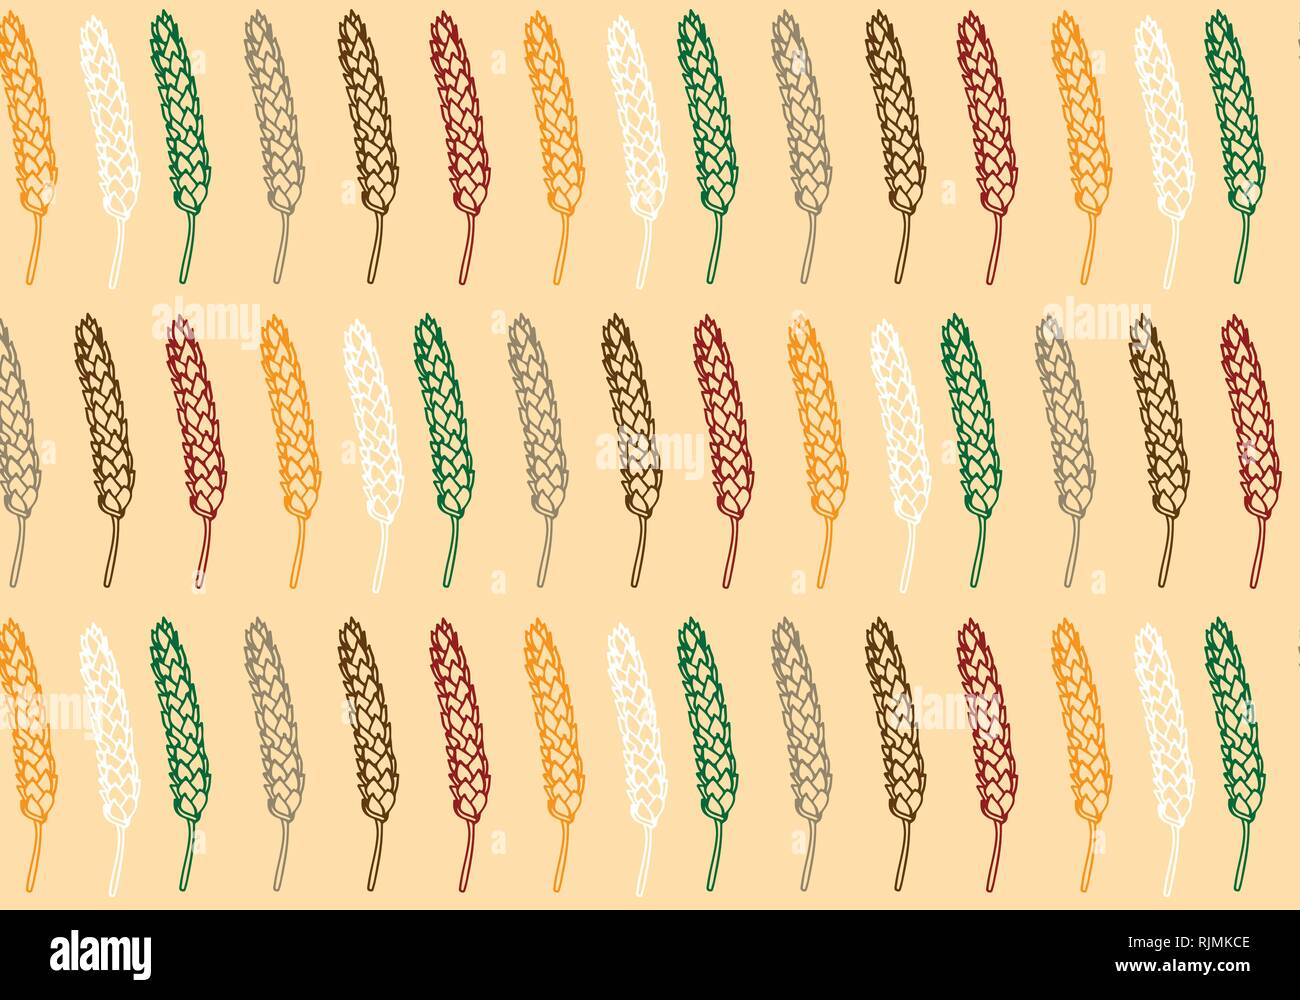 Vector pattern illustration hand drawn spring wheat in orange,green, brown, red, white and gray colors palette. Malt beer background. Autumn harvest. Stock Vector